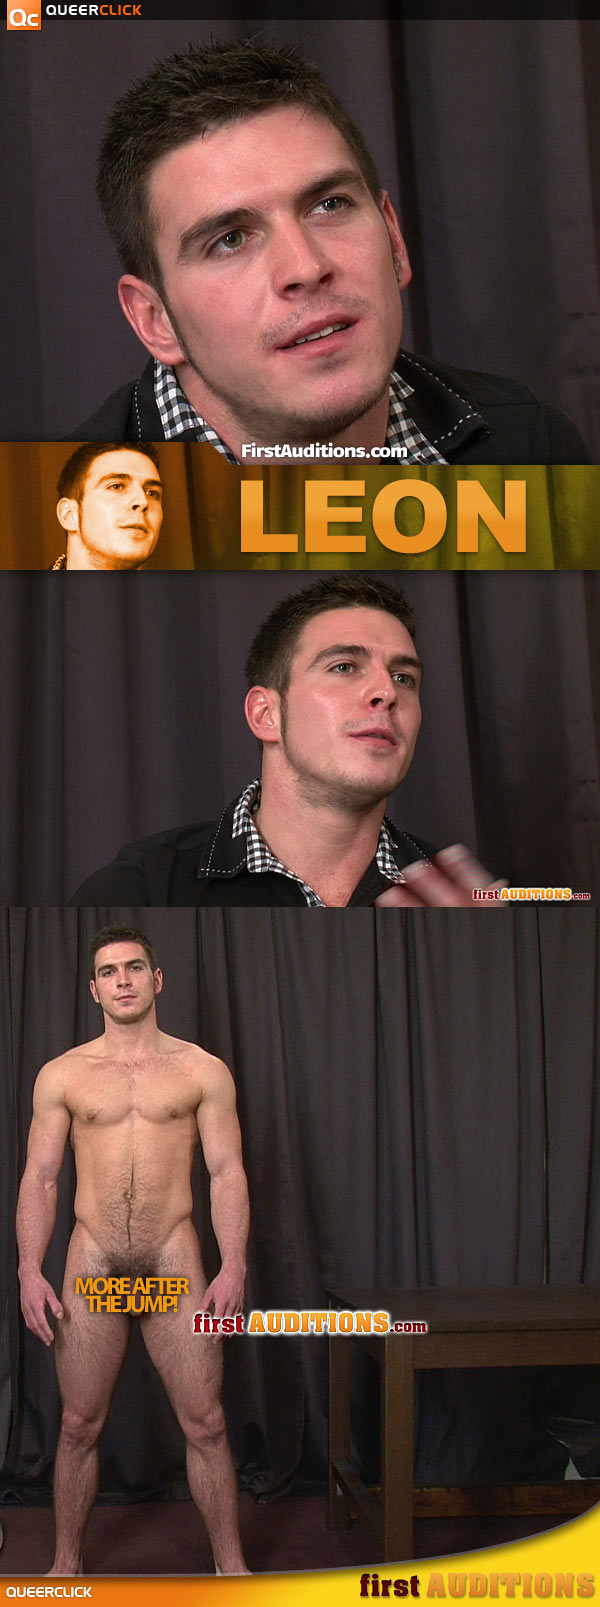 First Auditions: Leon